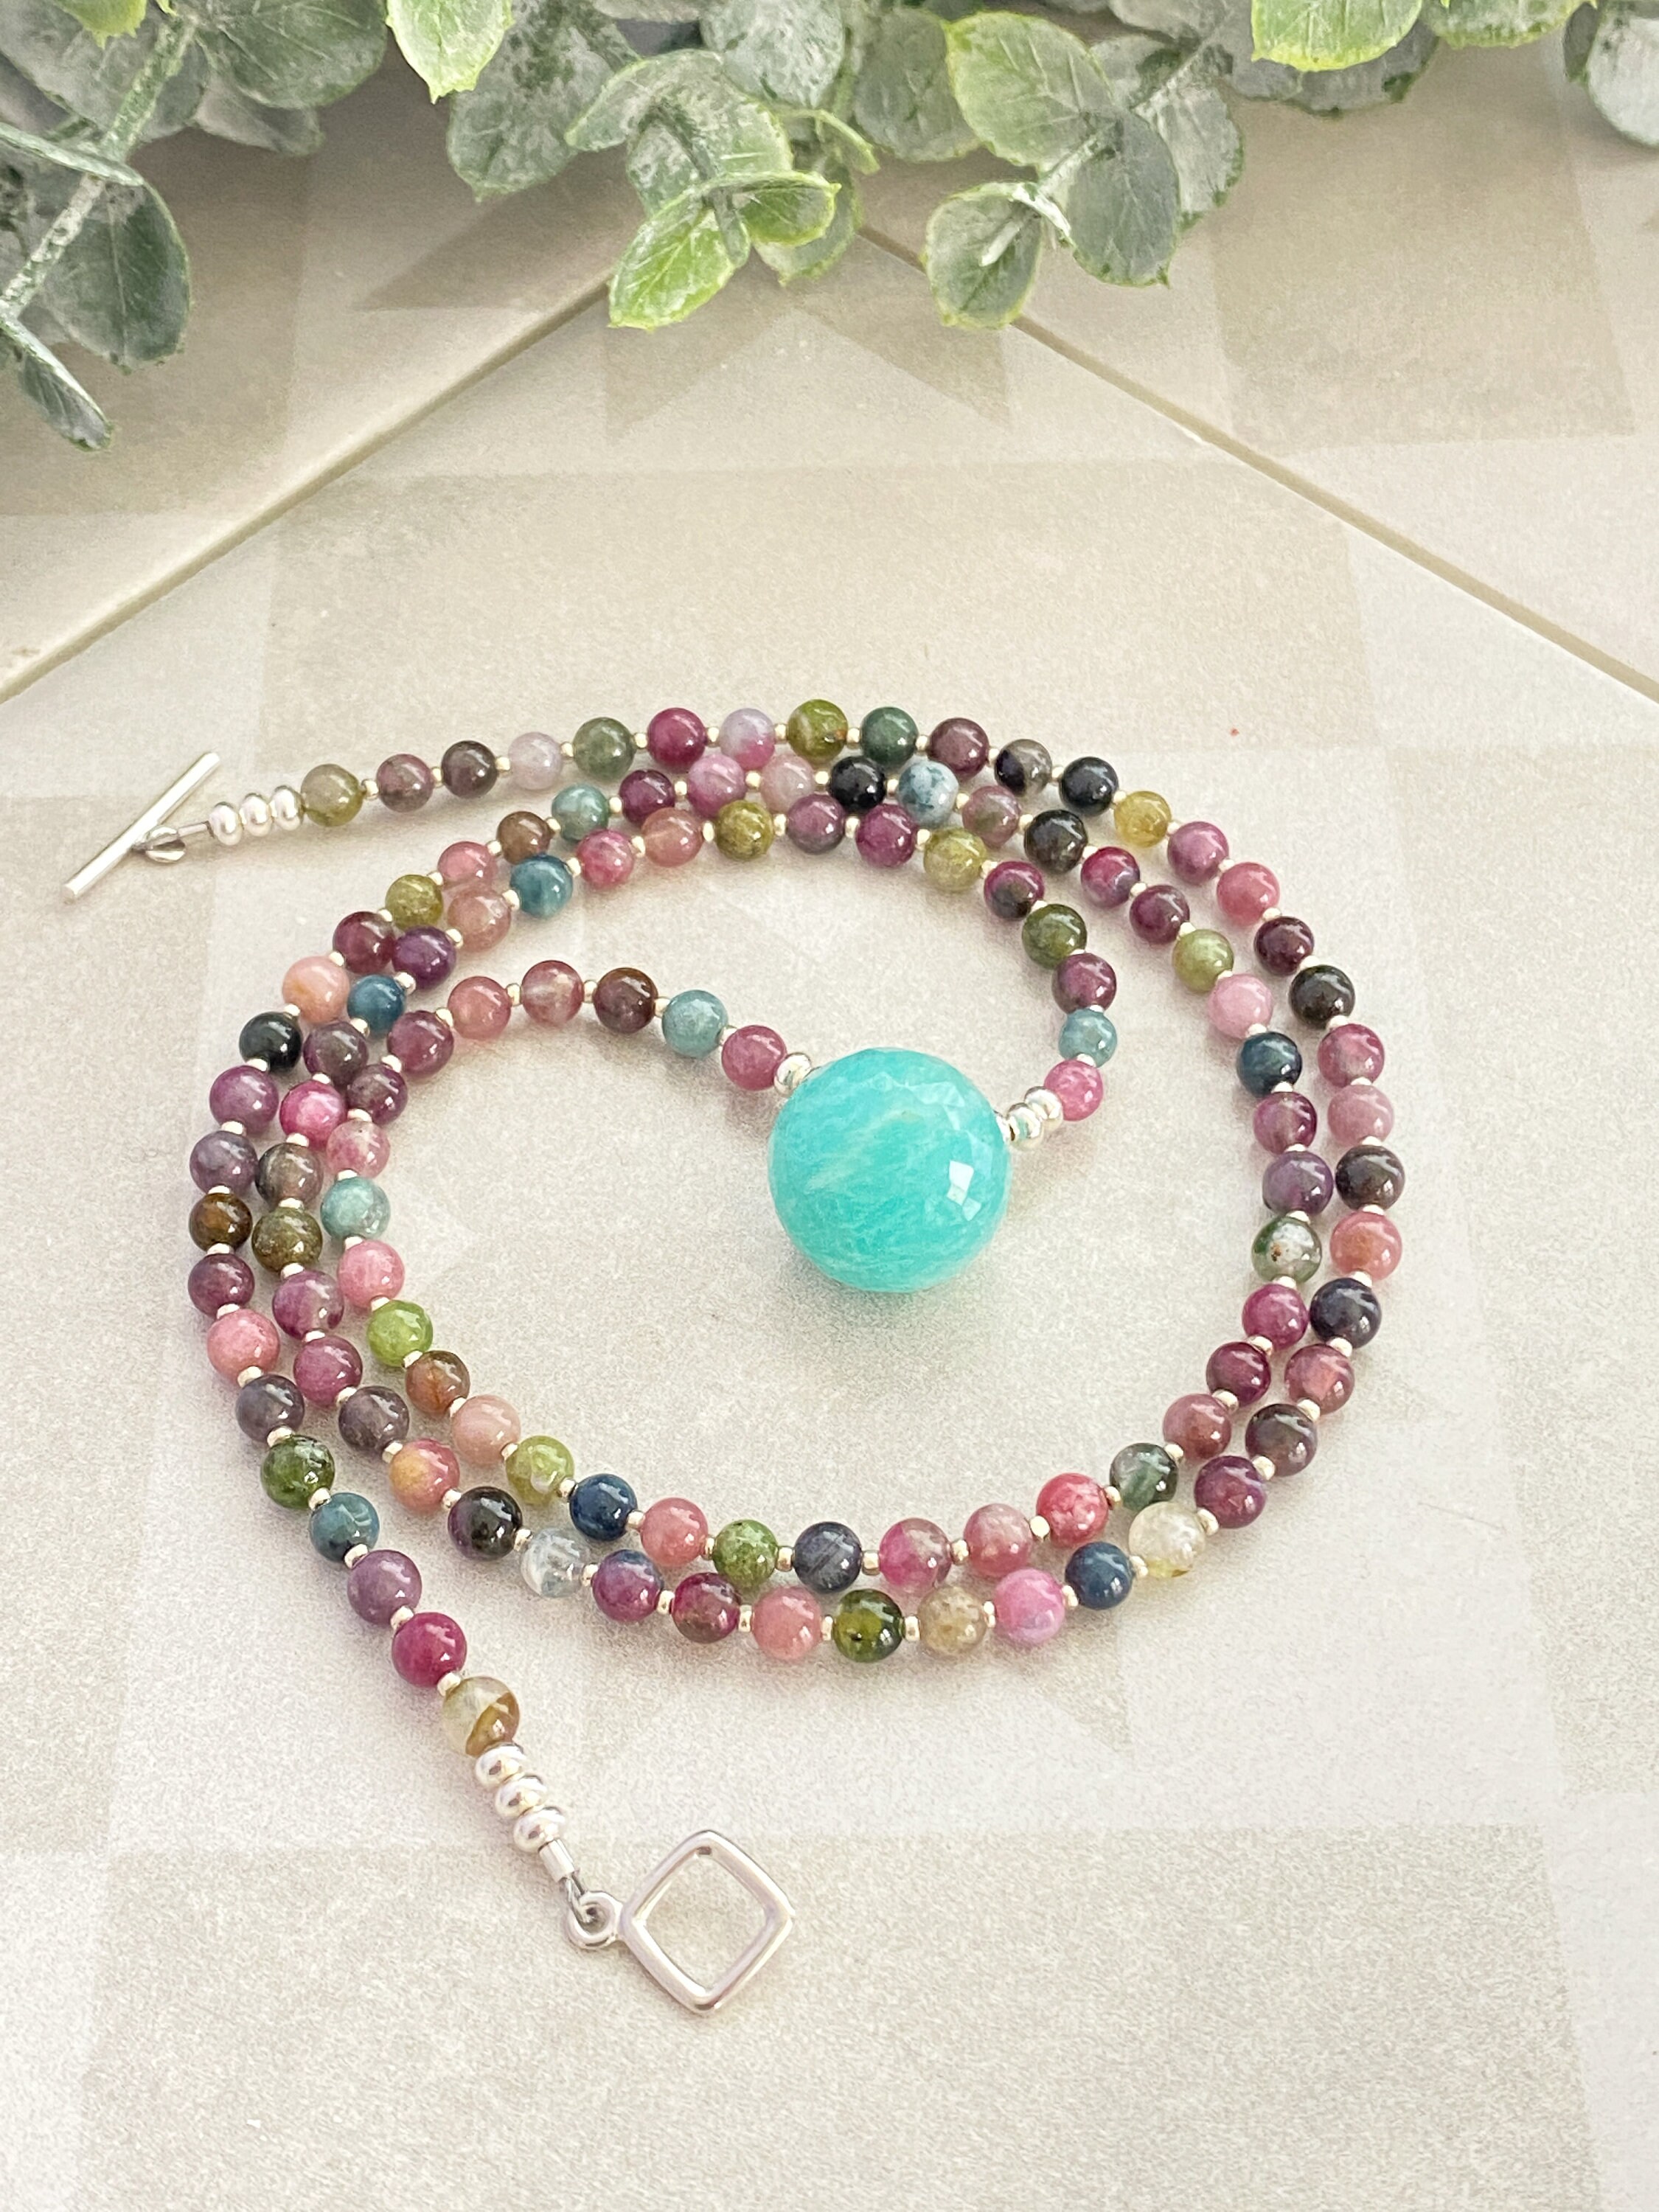 Watermelon Tourmaline Necklace, Long Boho Gemstone Bead Necklace, October  Birthstone Necklace, ite Drop Pendant, Bead Necklace Gift 